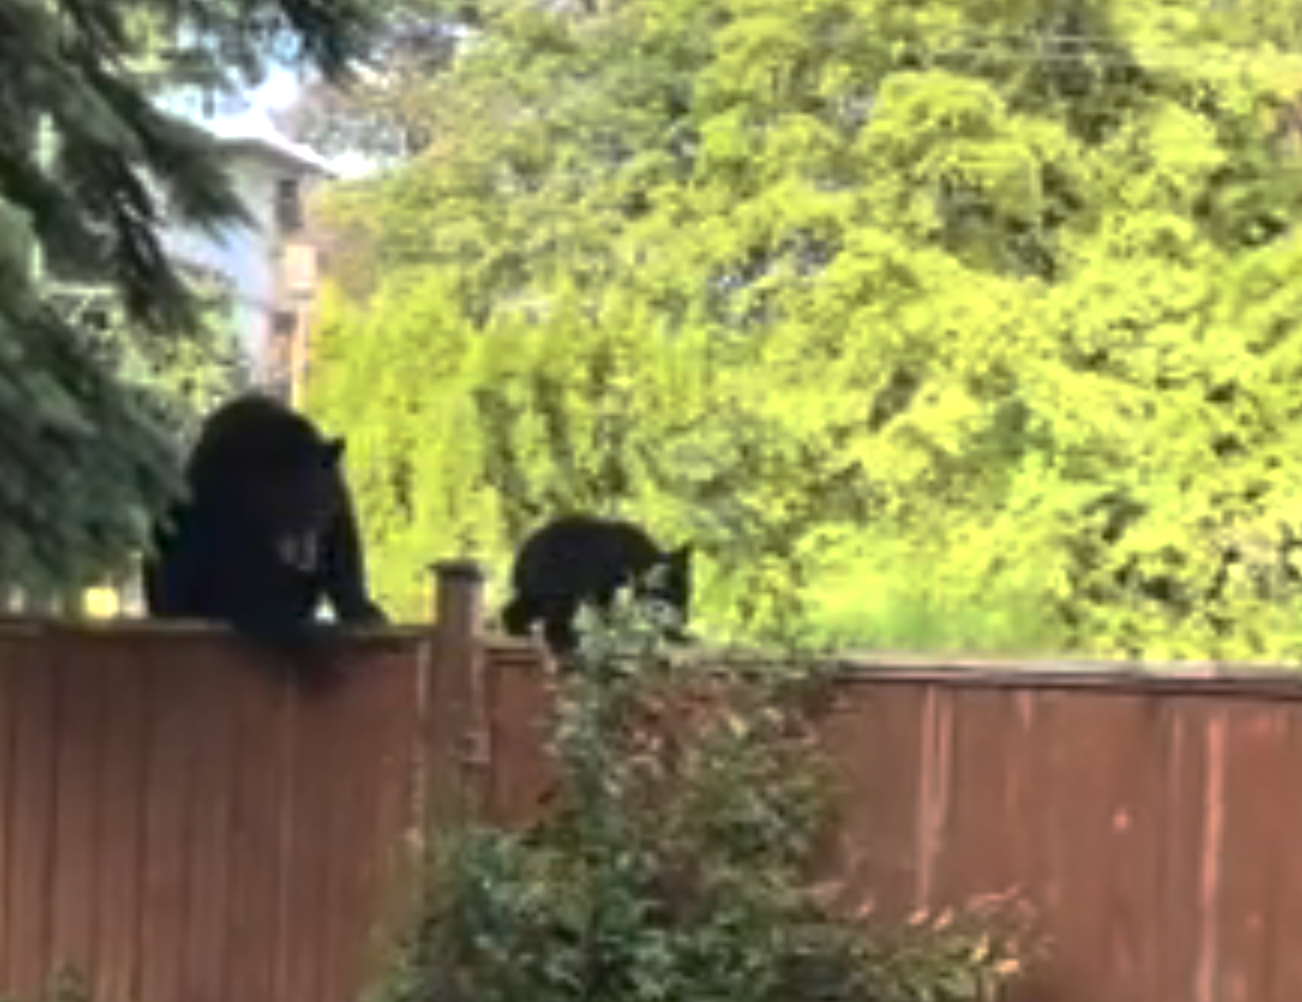 Caught on Camera: Momma Bear and her cubs entering into a Coquitlam house backyard